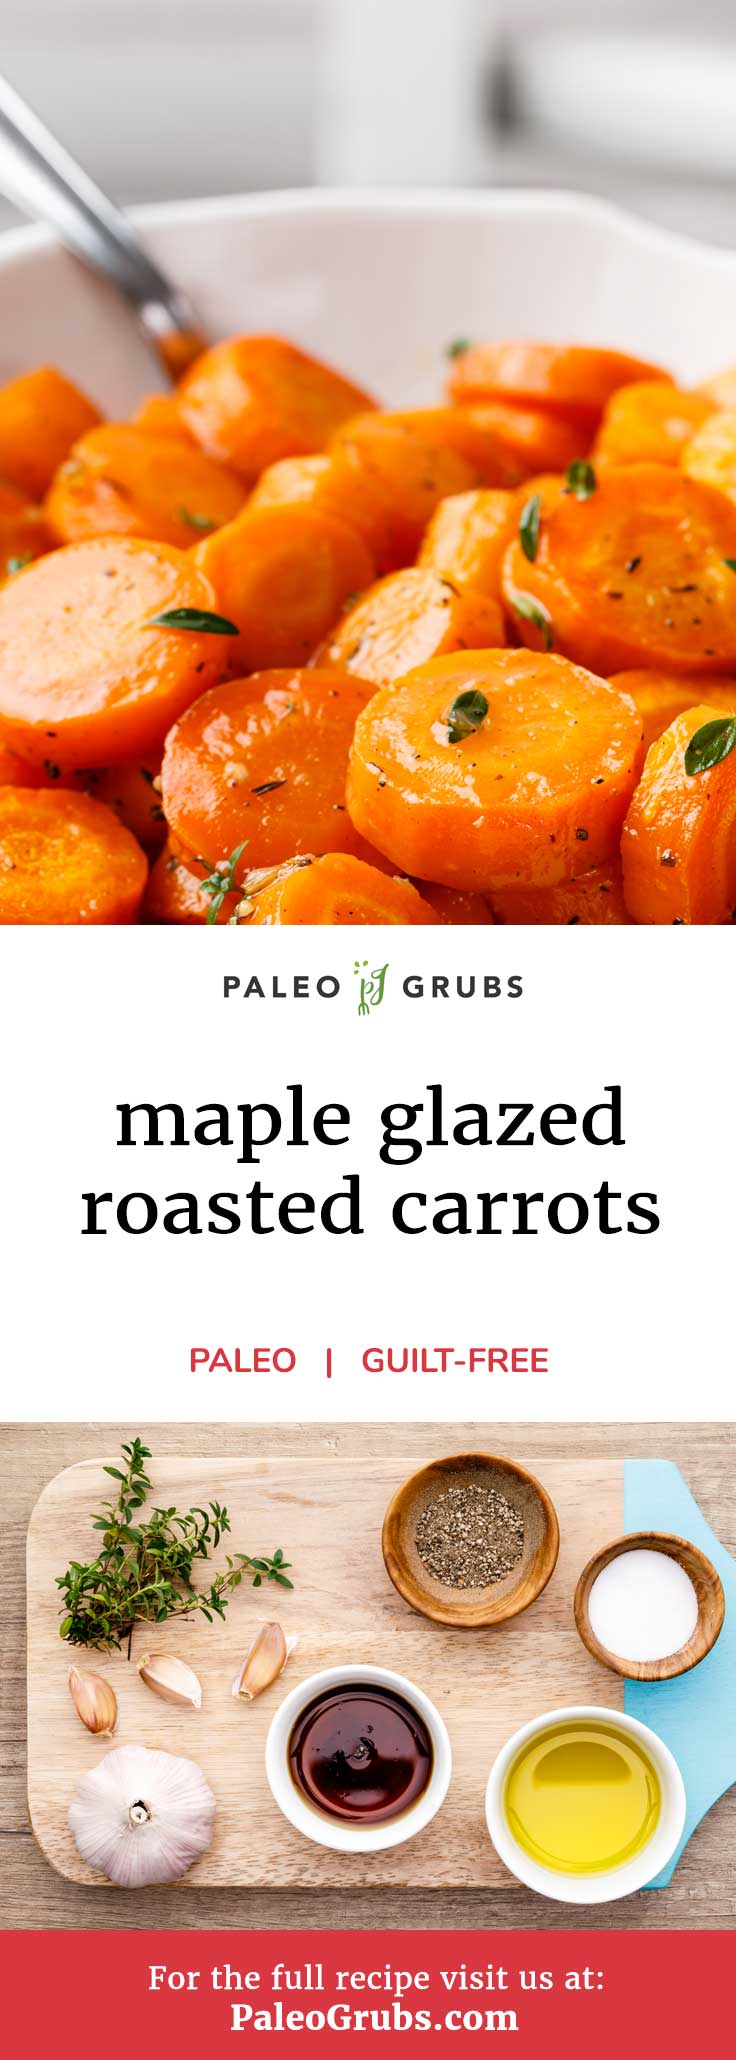 This recipe for maple glazed roasted carrots is every bit as delicious as it sounds! By adding garlic, thyme, and maple syrup to carrots that have been cut into ¼ inch thick rounds, along with just the right amount of olive oil, salt and pepper, the carrots become perhaps the ultimate healthy paleo snack. Ever since trying this out, I can’t get enough of it, and I’m confident that you’ll feel the same way.